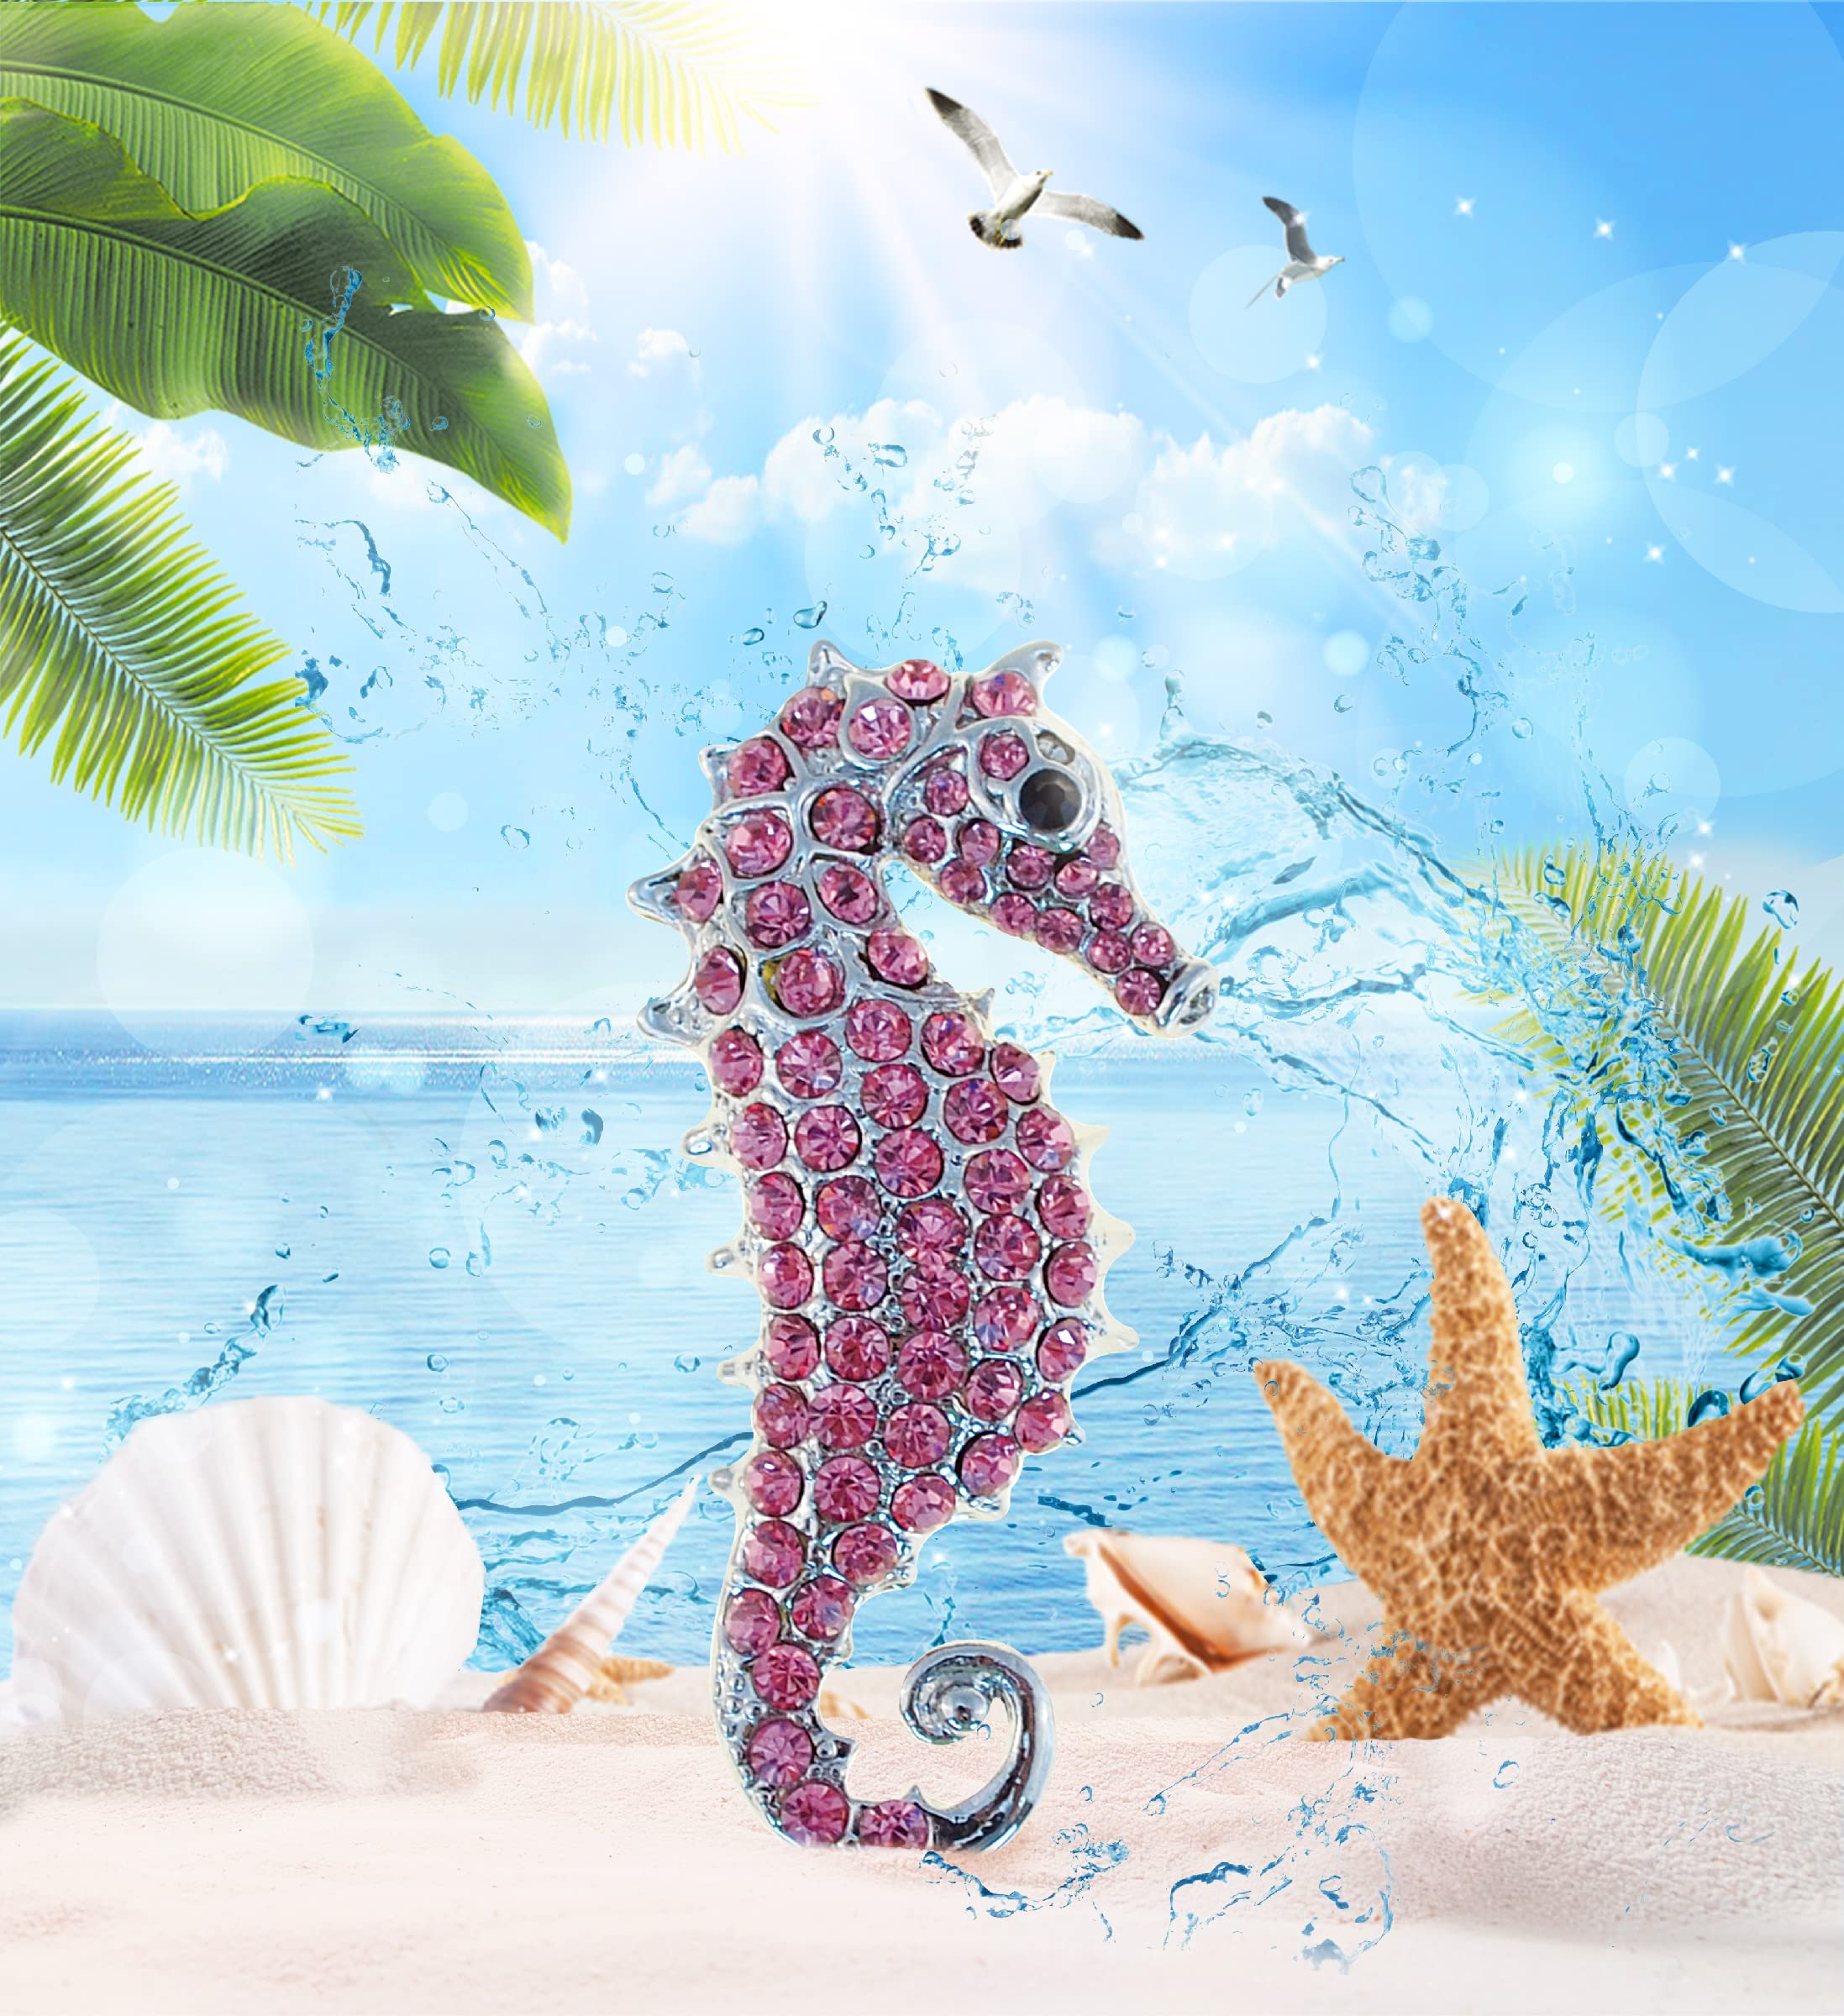 COTA Global Seahorse Sparkling Refrigerator Magnet - Pink & Silver Sparkling Rhinestones Crystals, Cute Sparkly Ocean Animal Magnet for Kitchen Door Fridge, Cool Home & Office Novelty Decor - 2 Inch